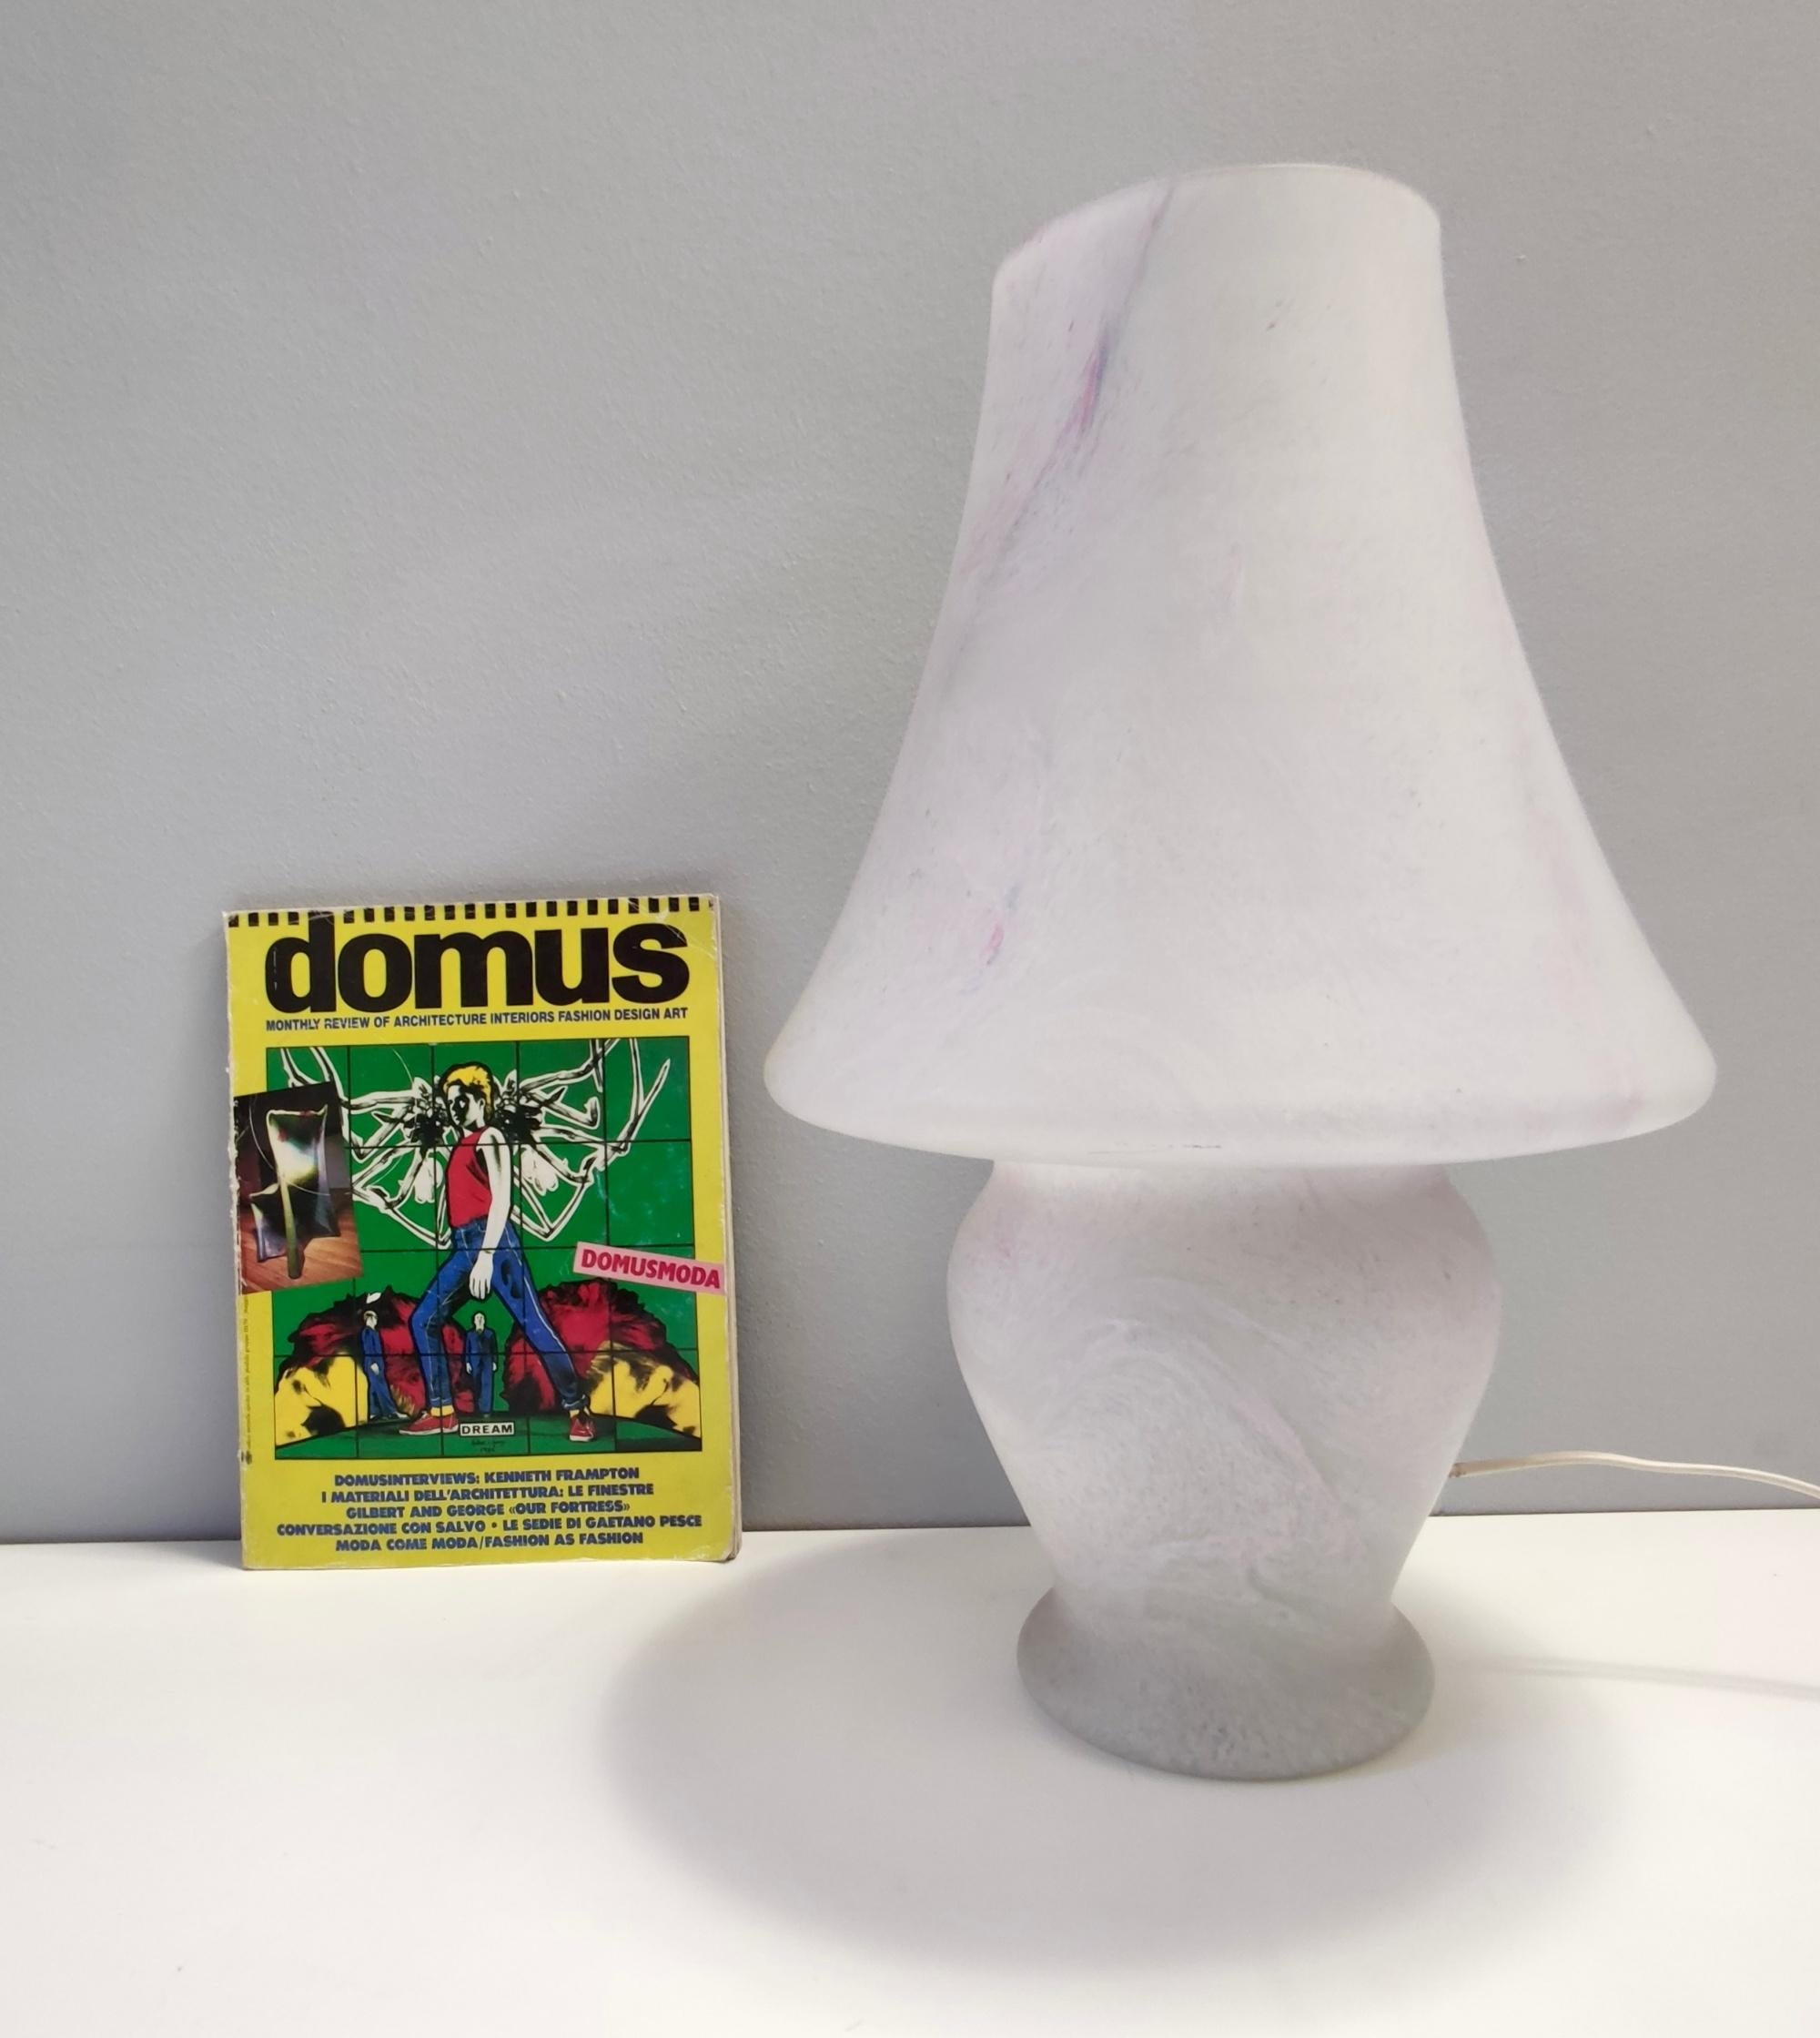 Made in Italy, 1970s. 
It is made in Murano glass with a pink marble effect.
This lamp might show slight traces of use since it's vintage, but it can be considered as in excellent original condition and ready to give ambiance to any room.